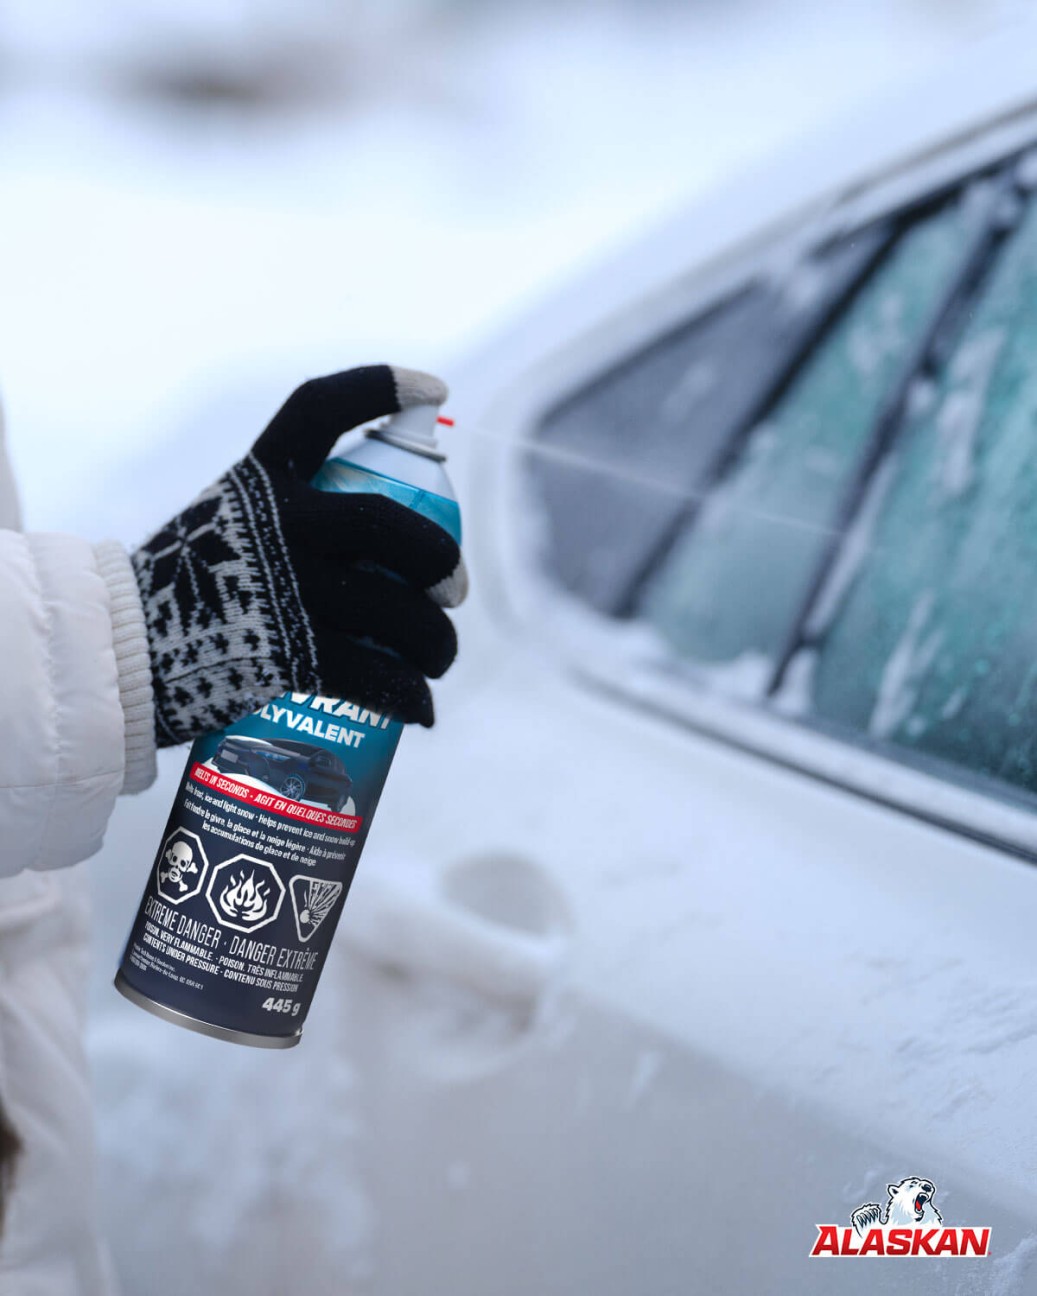 Car Deicer Spray De Ice Defroster For Car Window Cleaner Auto